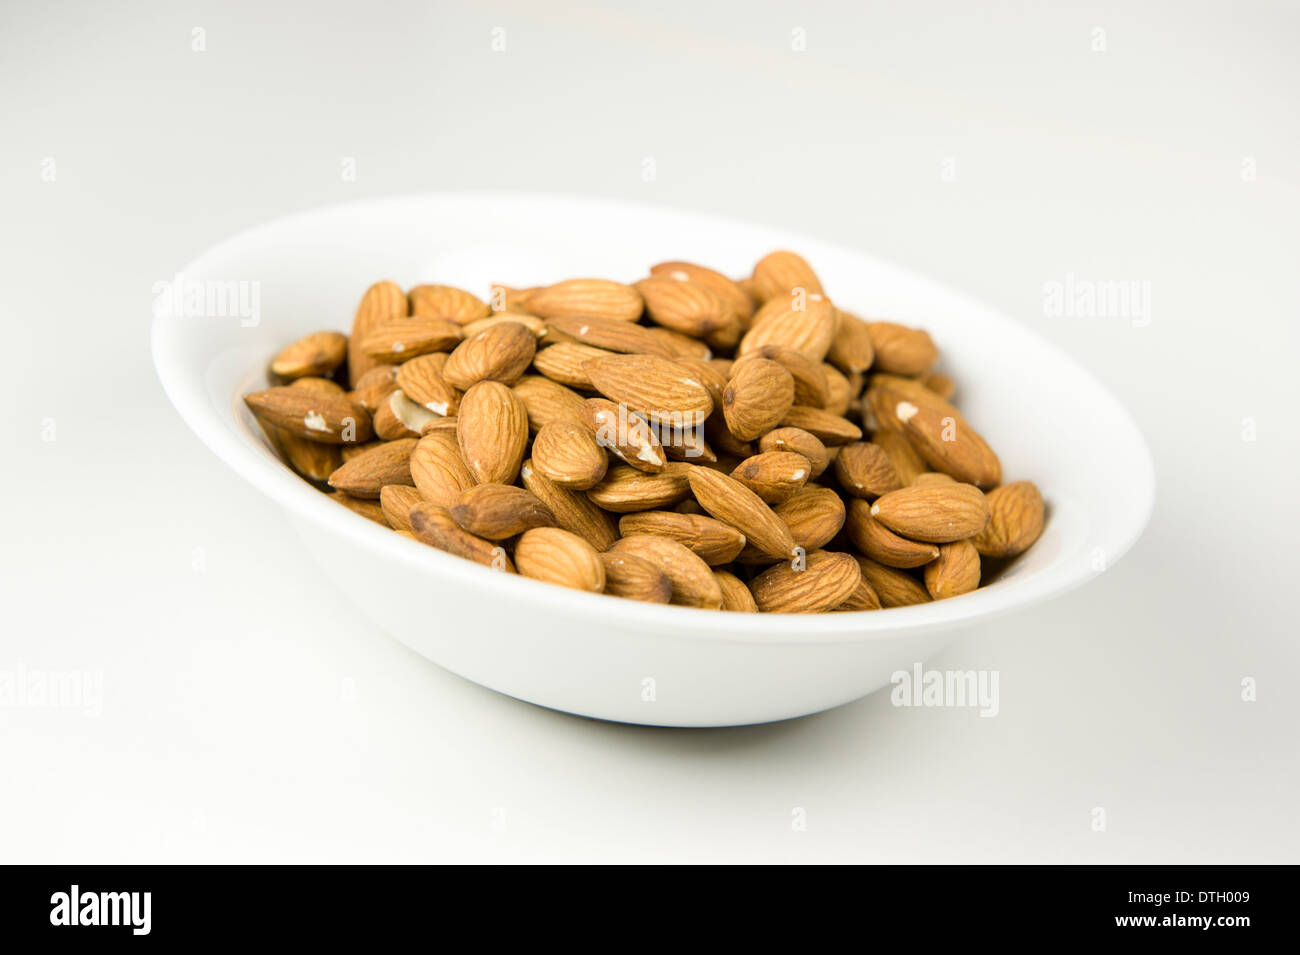 Close up photograph of shelled almonds in a white bowl, on a white background. Stock Photo